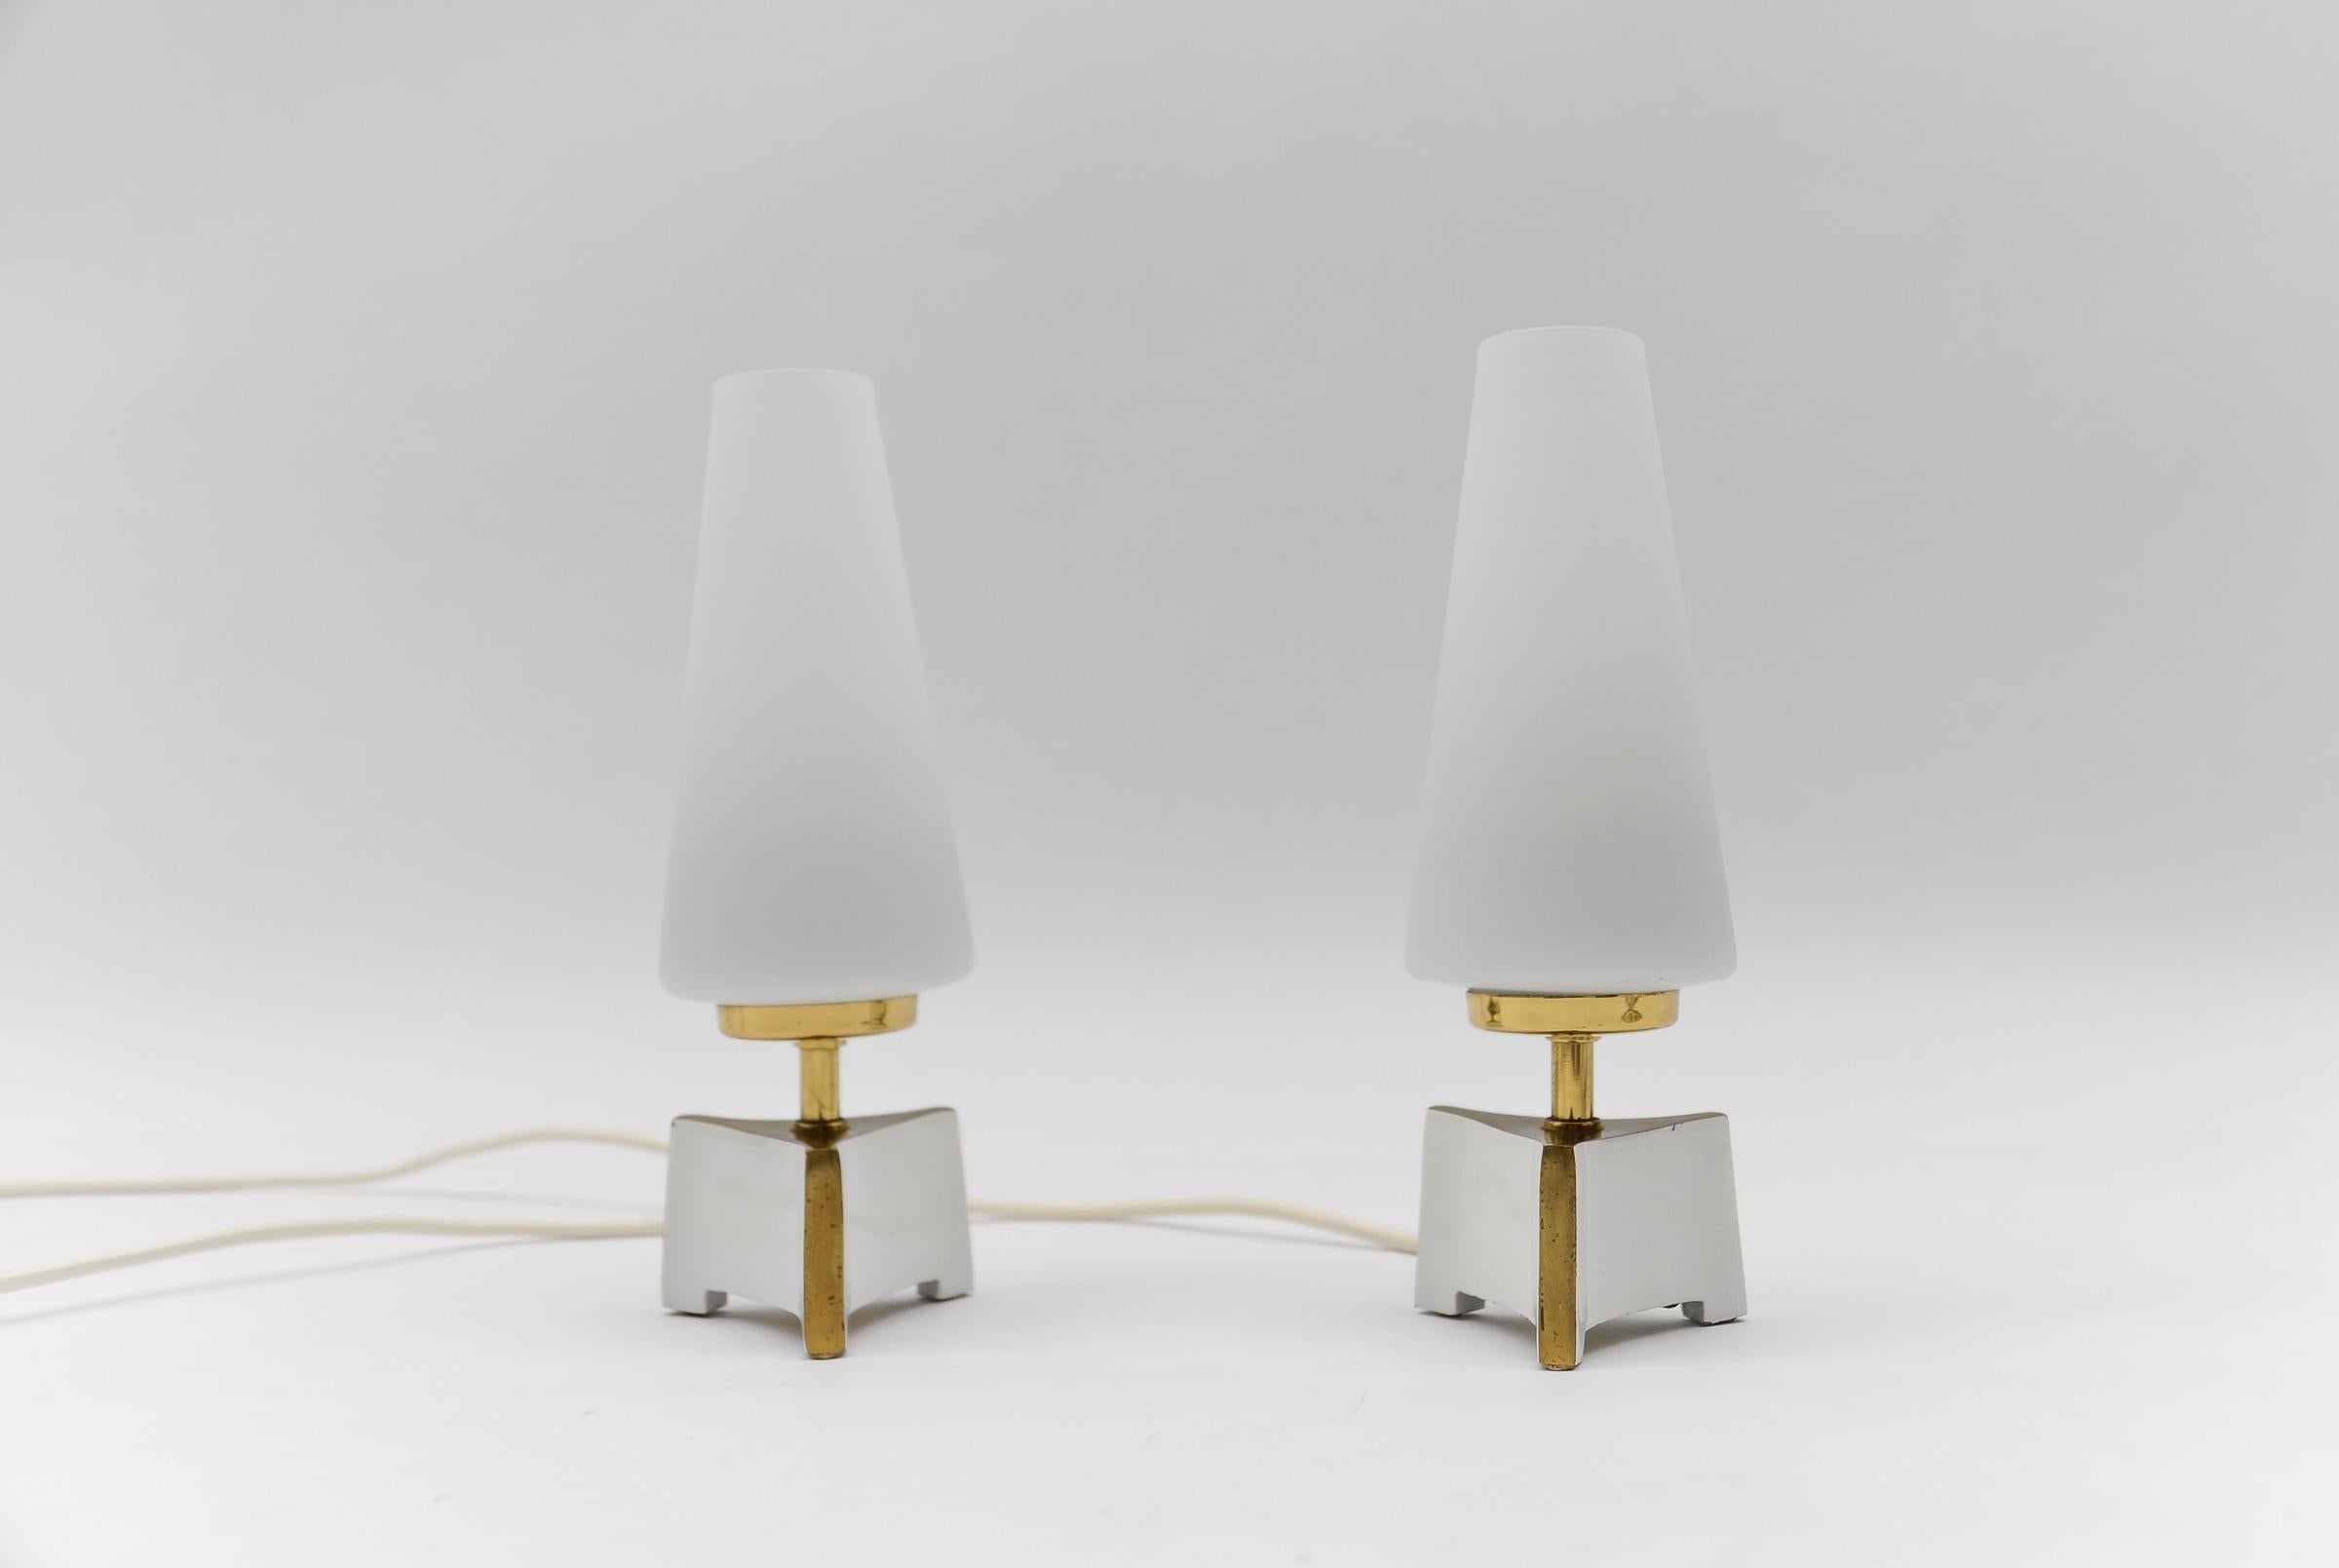 Petite Mid-Century Modern Massive Brass and Opaline Glass Table Lamps, 1950s

Dimension
Height: 9.05 in (23 cm)
Width: 3.14 in (8 cm)

Each lamp needs 1 x E14 Edison screw fit bulb, is wired, and in working condition. It runs both on 110 / 230